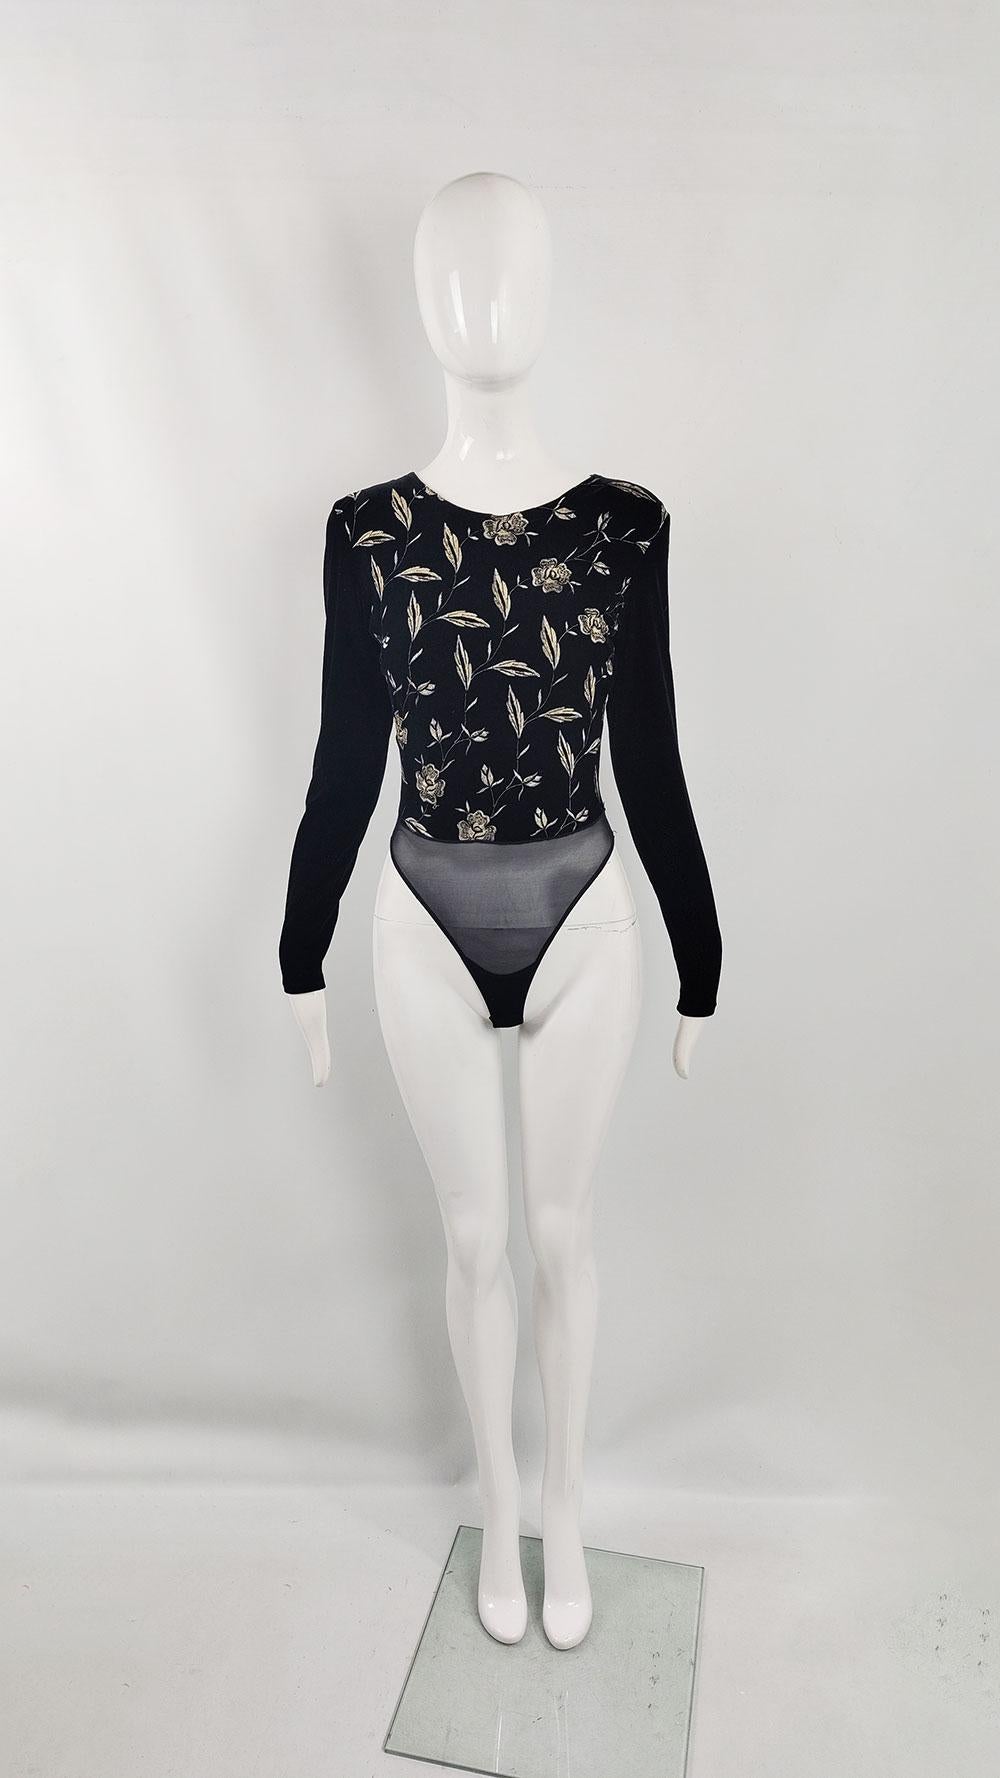 A fantastic vintage women's bodysuit from the late 90s /early 2000s by the French label Sagaie Paris. Made from black velour, it features long sleeves and exquisite pale gold floral embroidery on the front. An ideal choice for parties.

Size: Marked